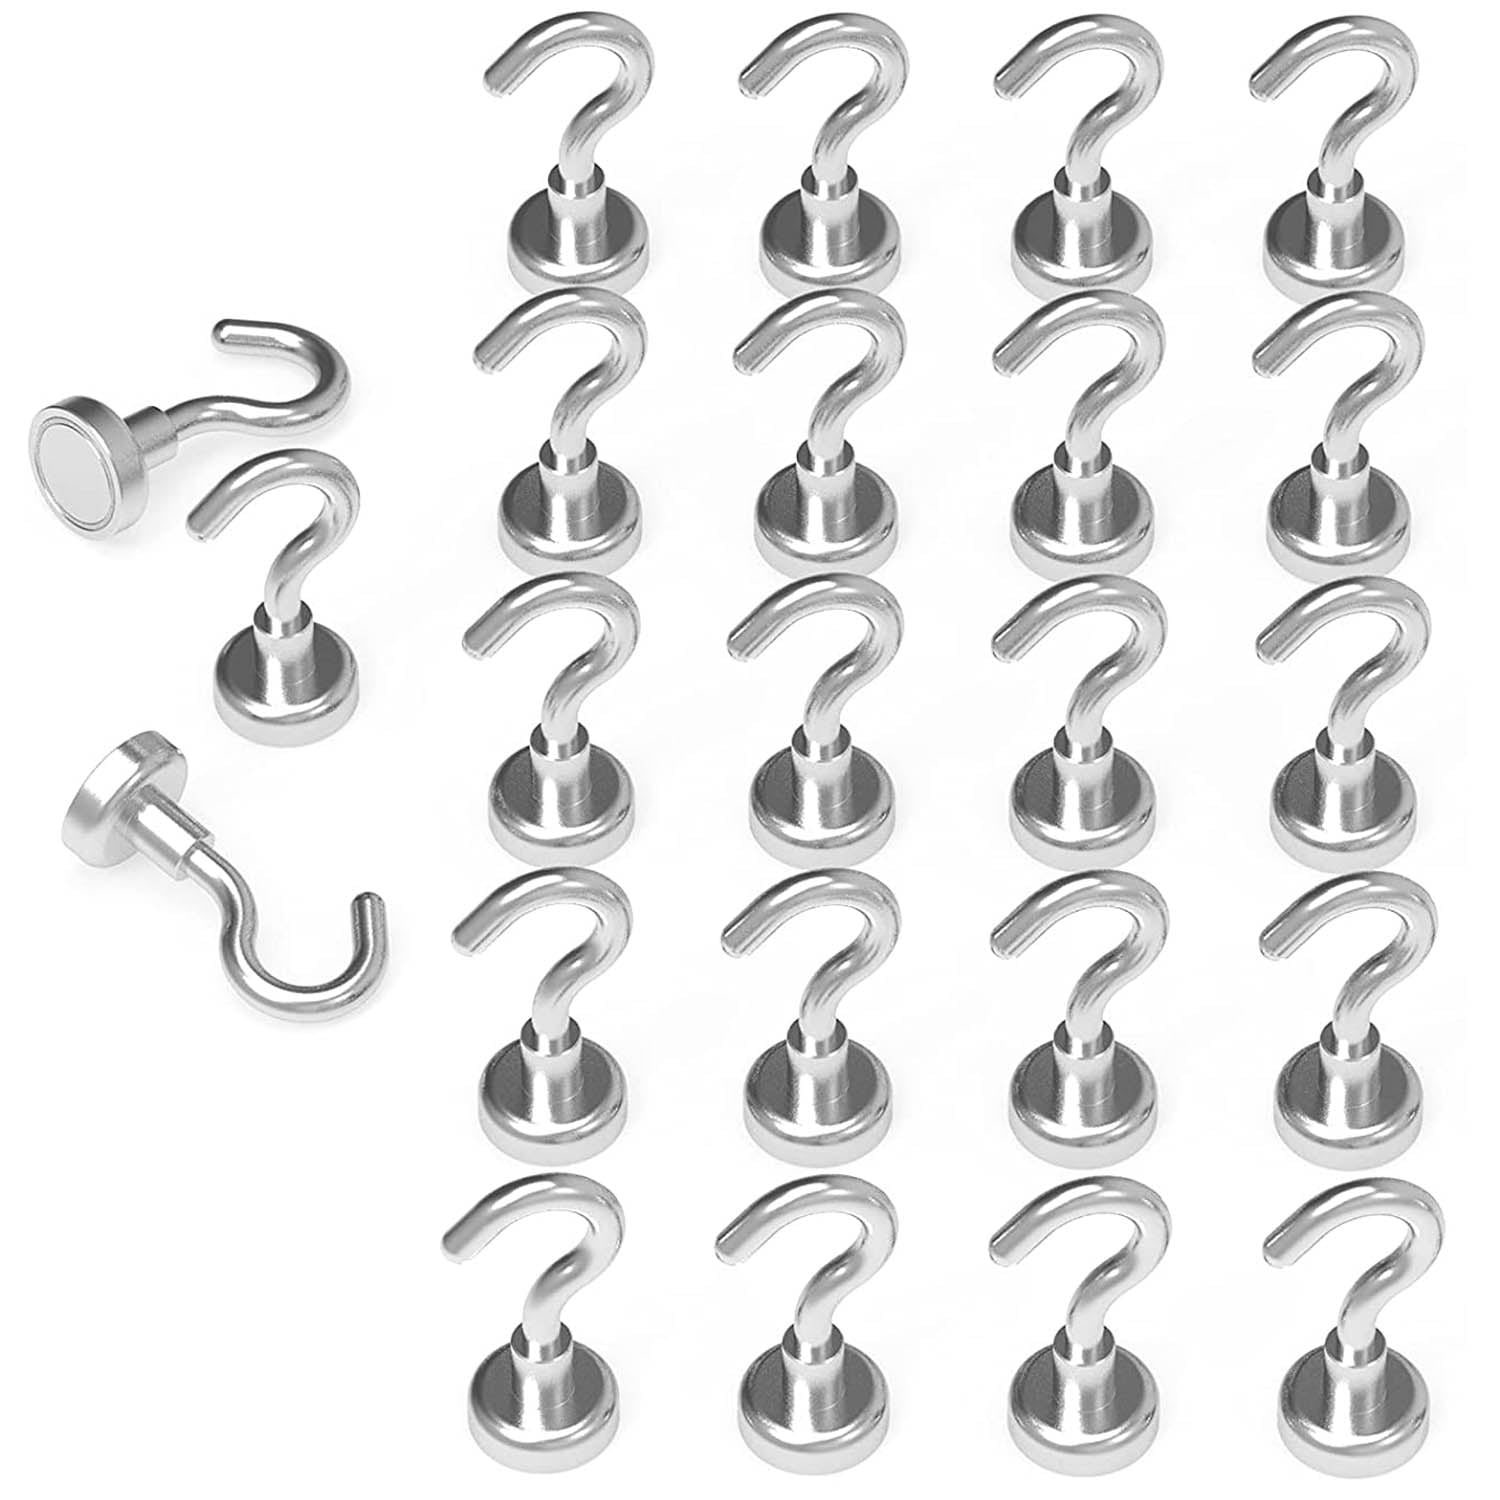 Heavy Duty Magnets Hook Fishing Industrial Kitchen Workplace Garage Magnets 